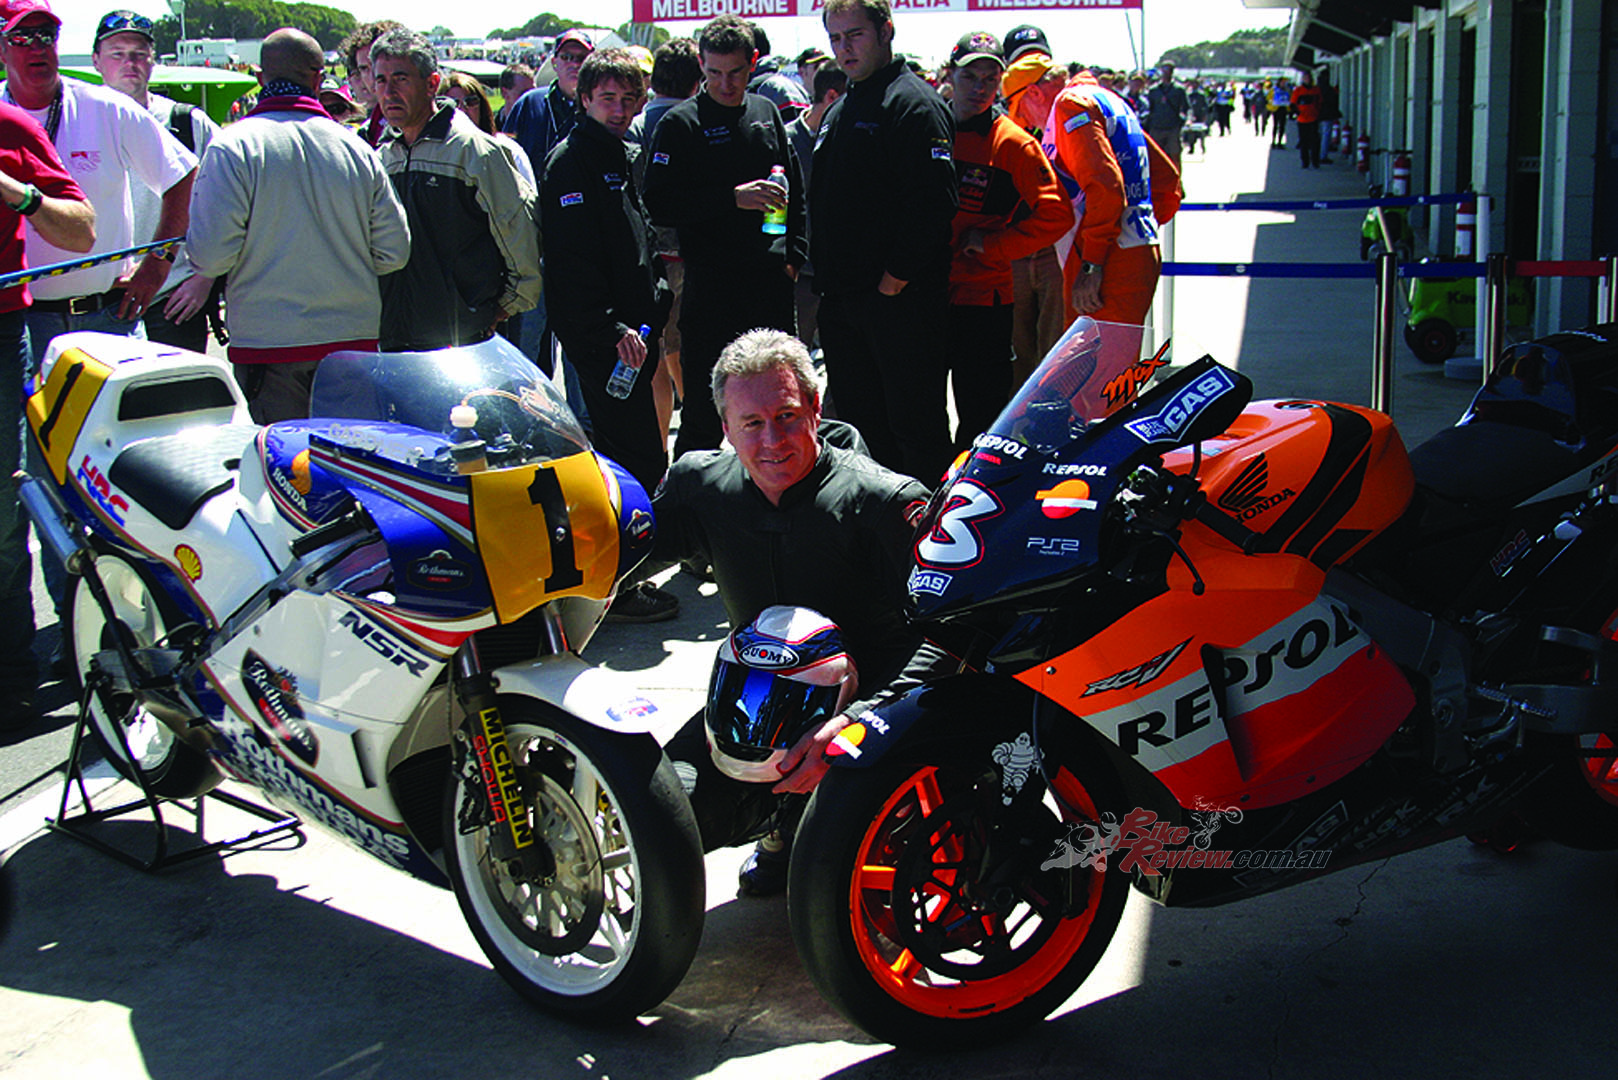 Tune into Thhrowback Thursday next week as we revisit Wayne Gardners spin on Max Biaggi's RC211V...